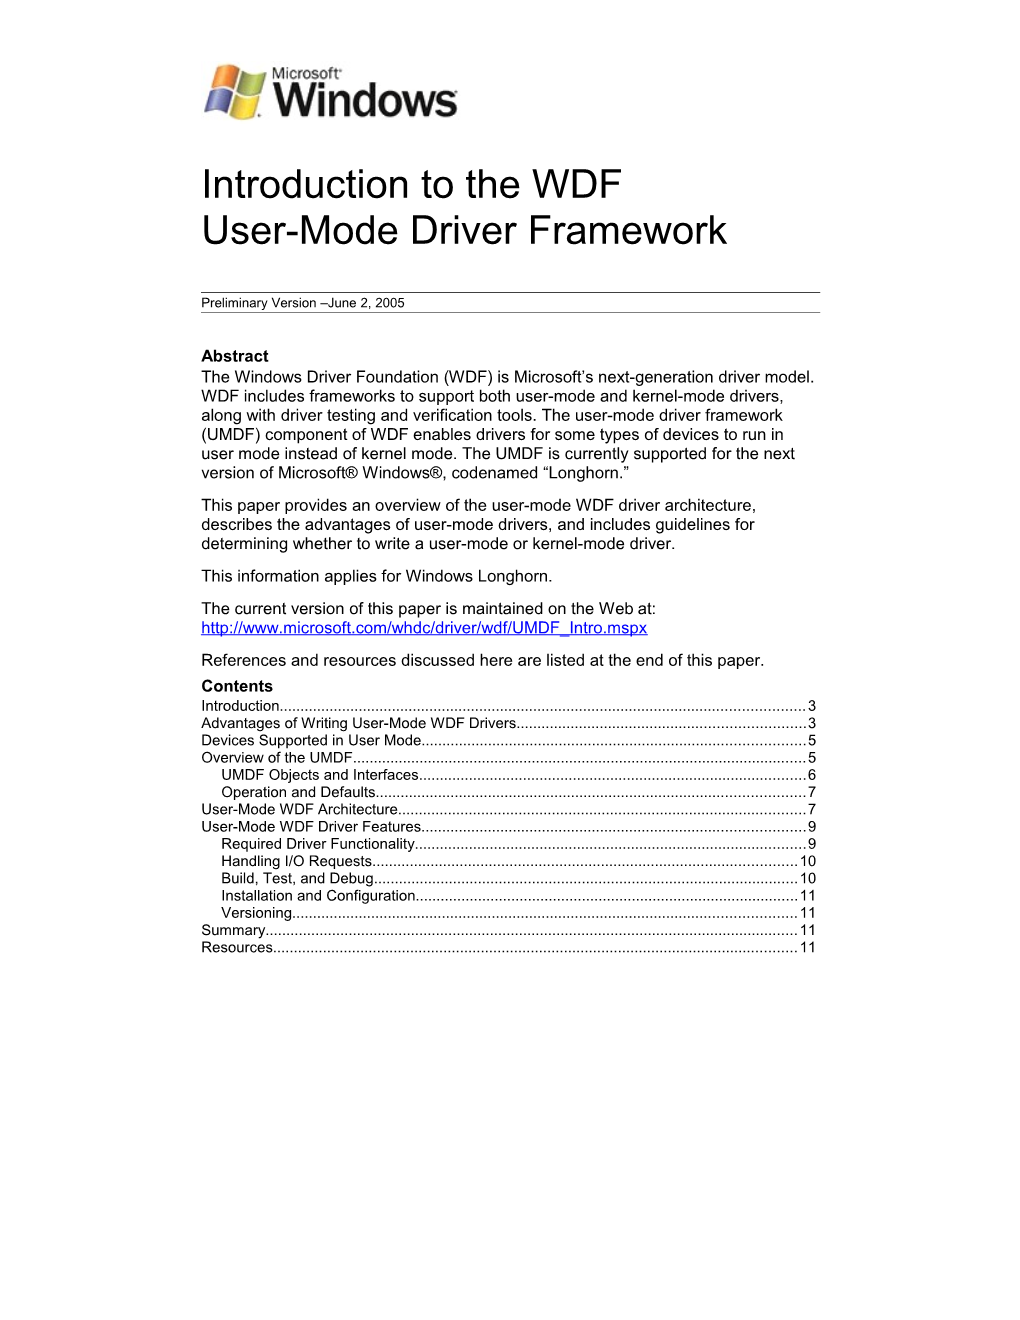 Introduction to the WDF User-Mode Driver Framework